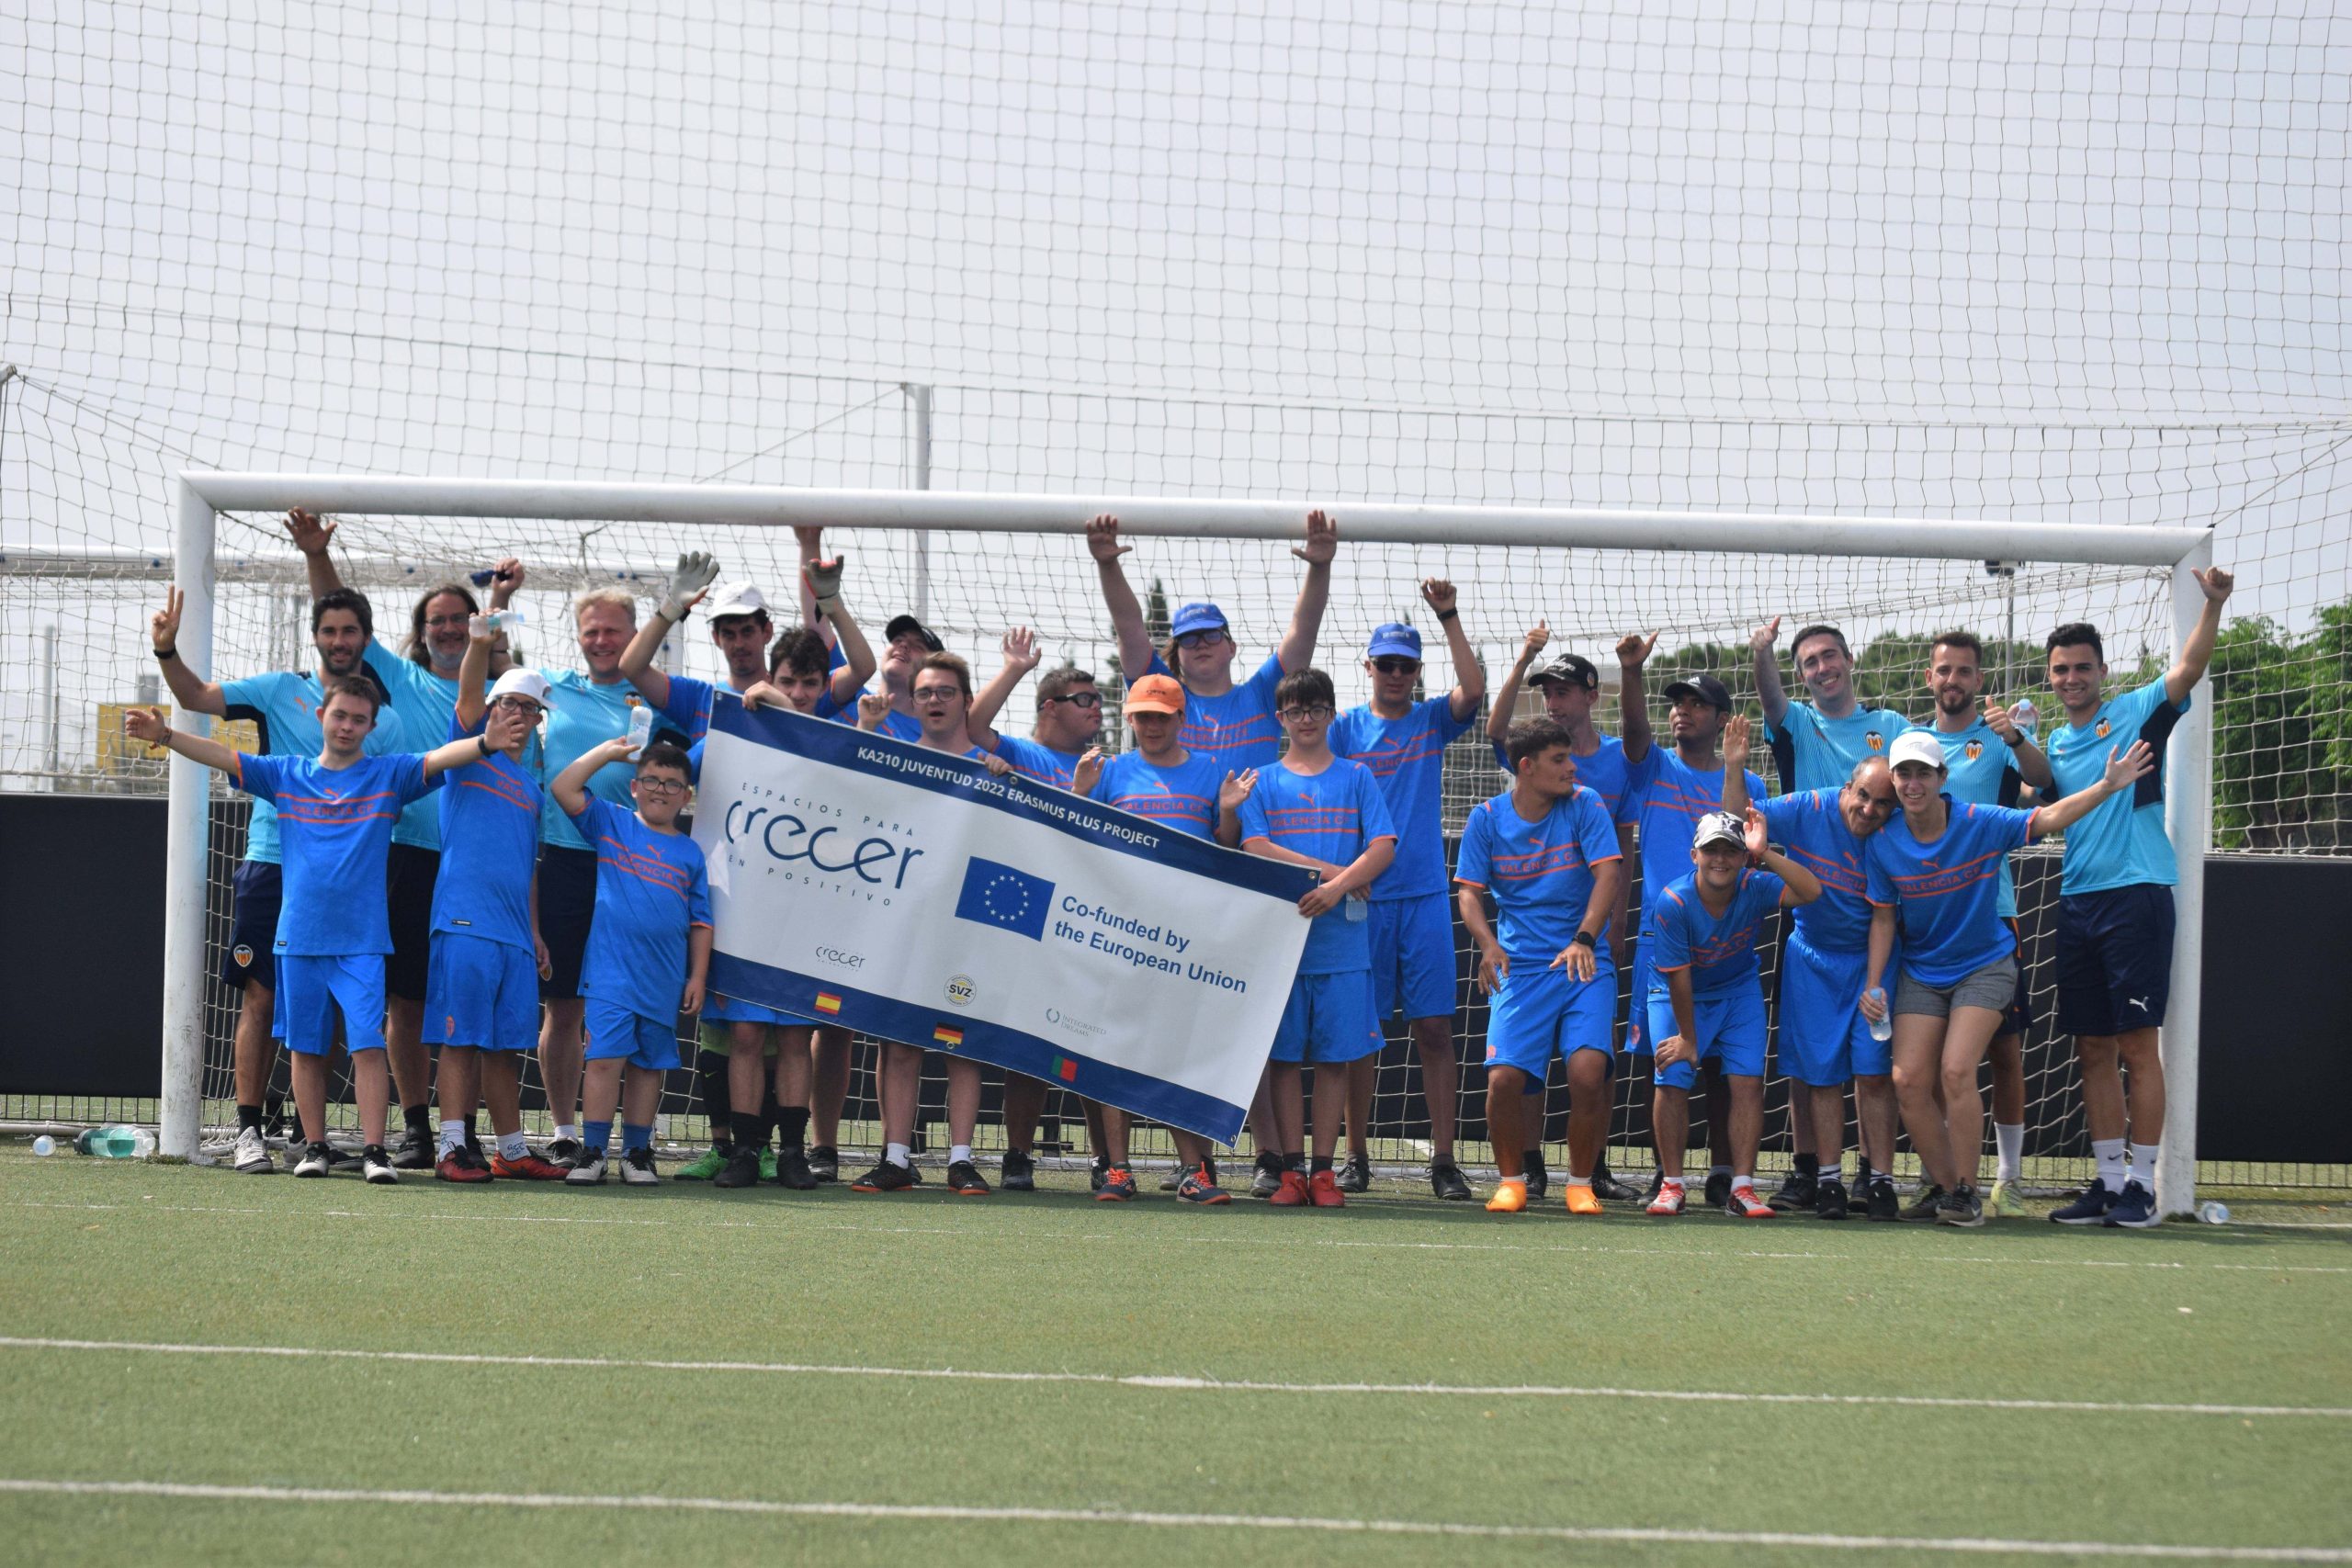 Crecer en Positivo Summer Football Clinic Football Team, pictured in front of a 11 a side football goal, together with project partners teams